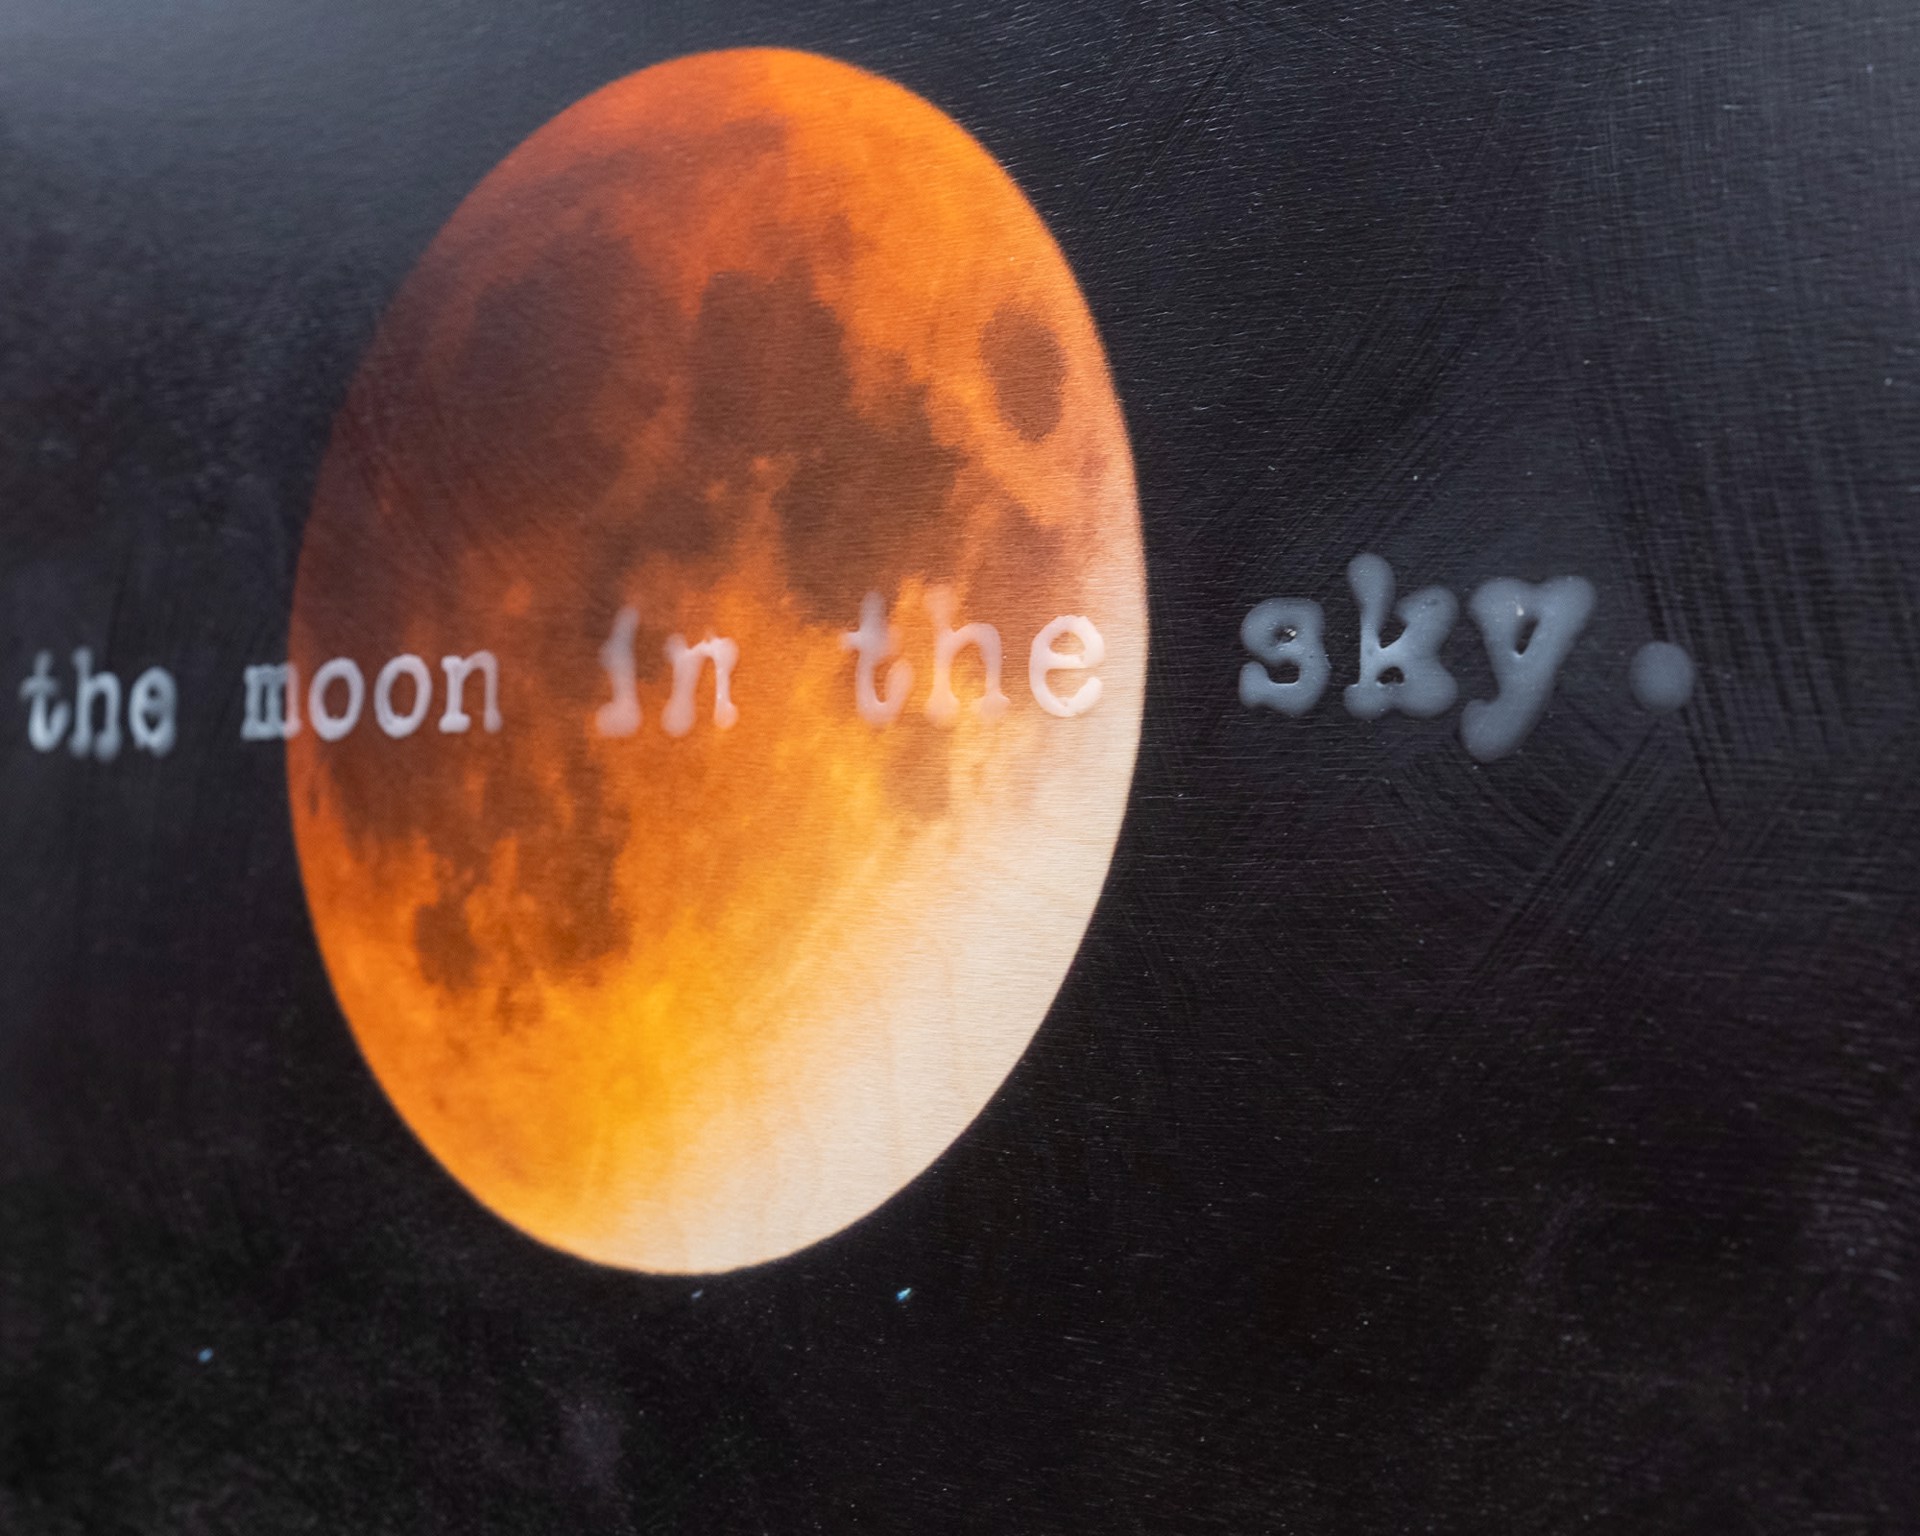 Our Only Lite, The Moon In The Sky by Patrick Lajoie